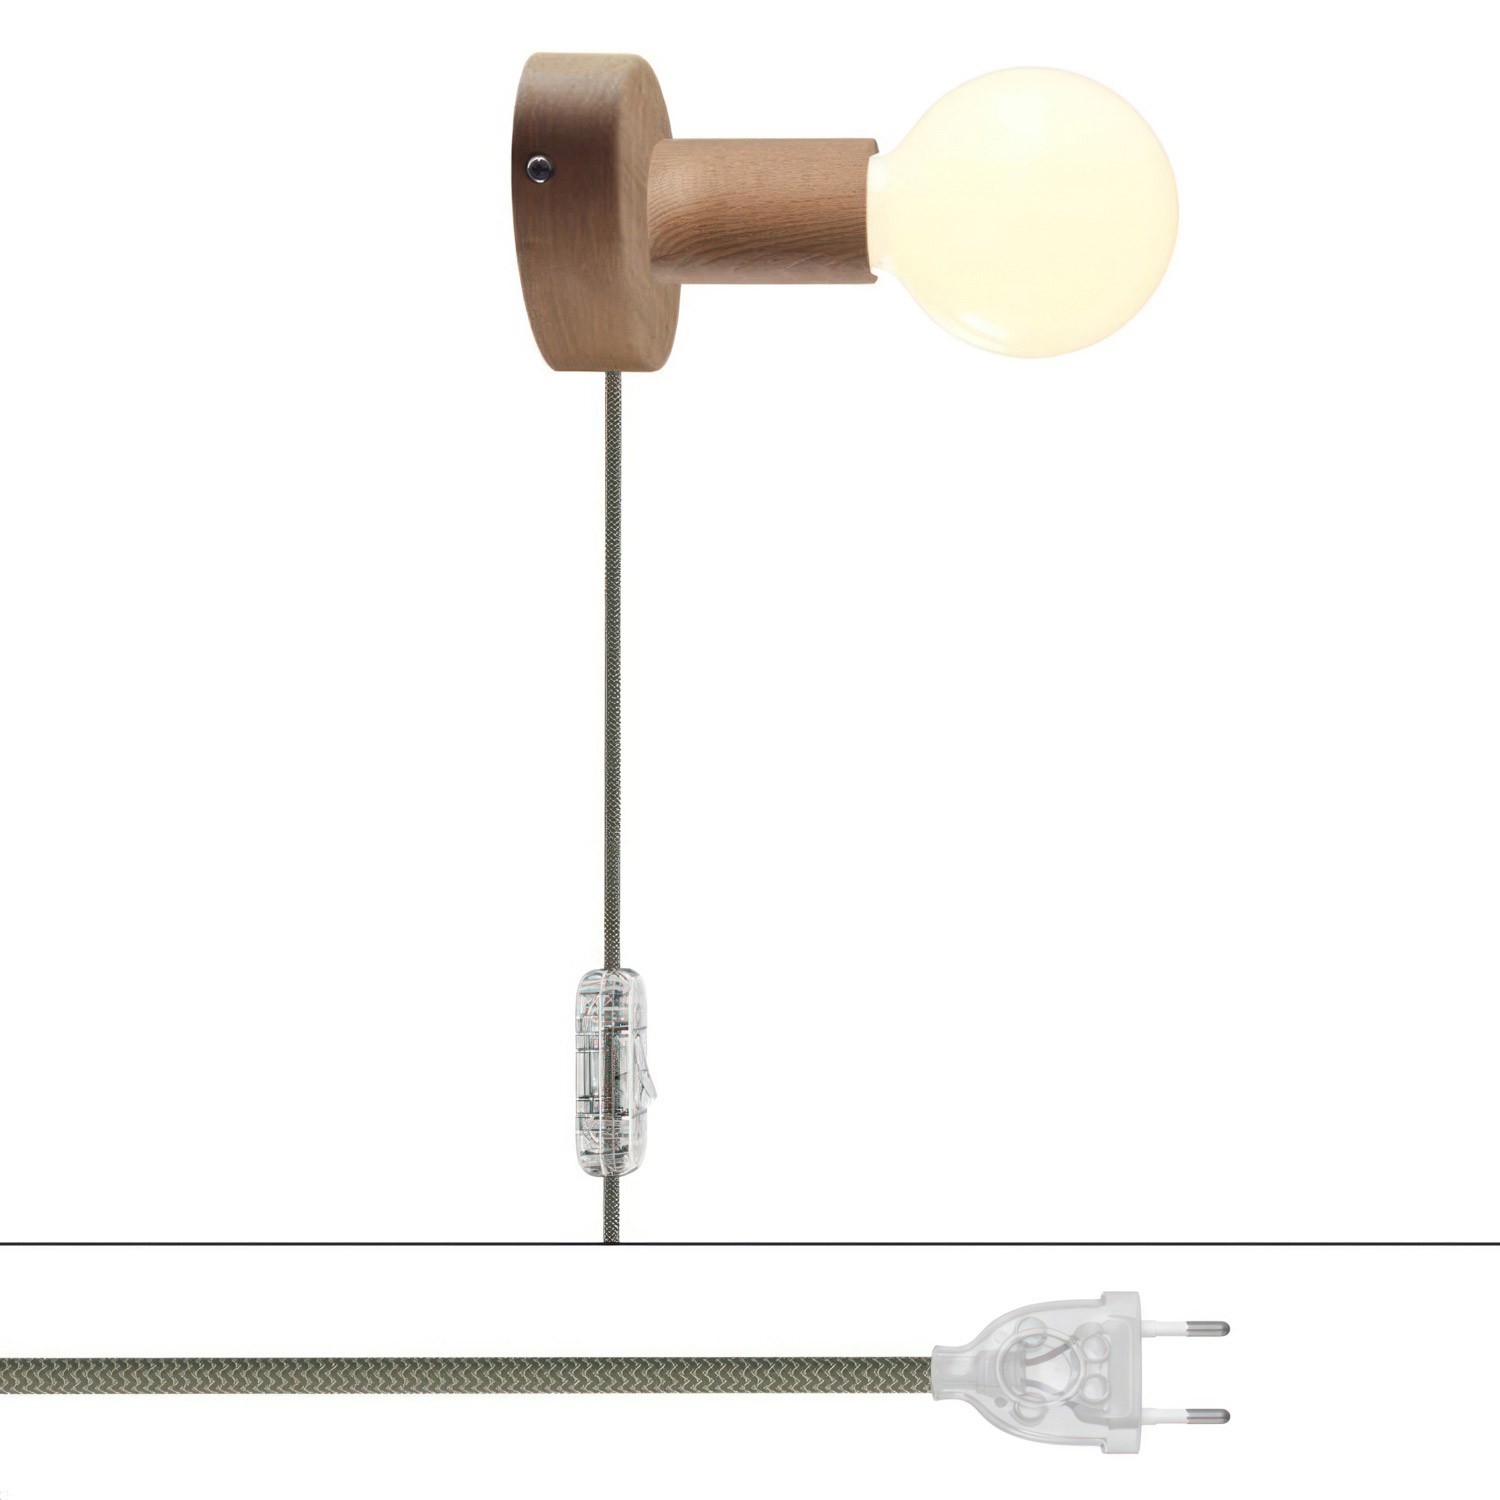 Spostaluce wooden Lamp with two-pin plug